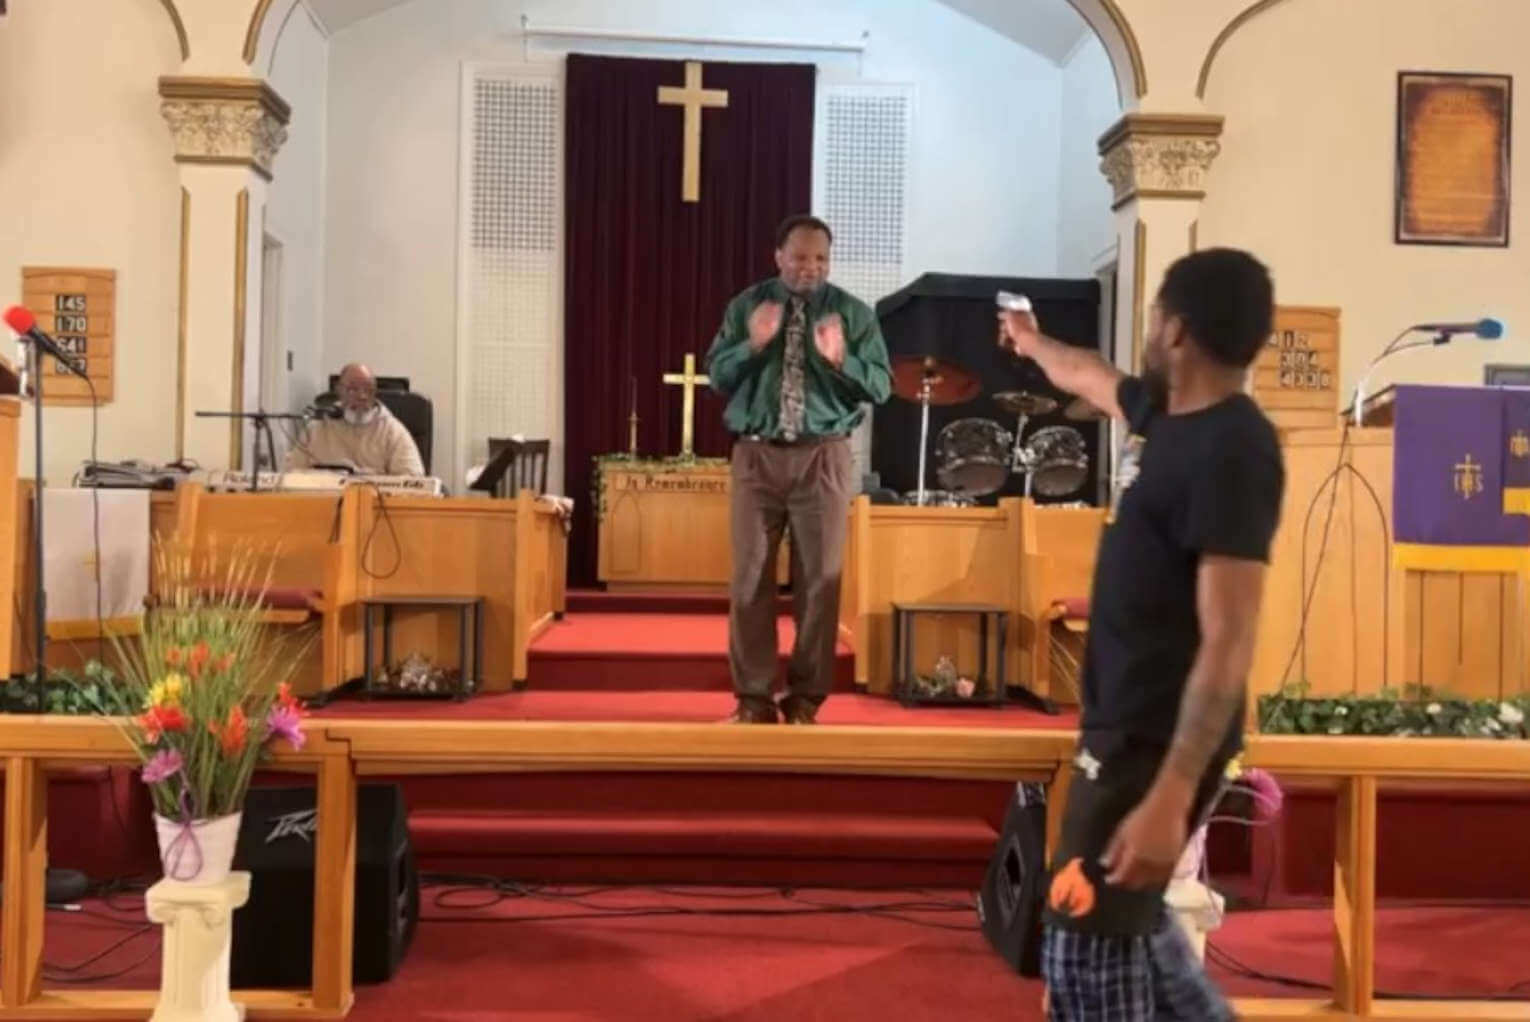 WATCH: Pastor Miraculously Saved From Gunman